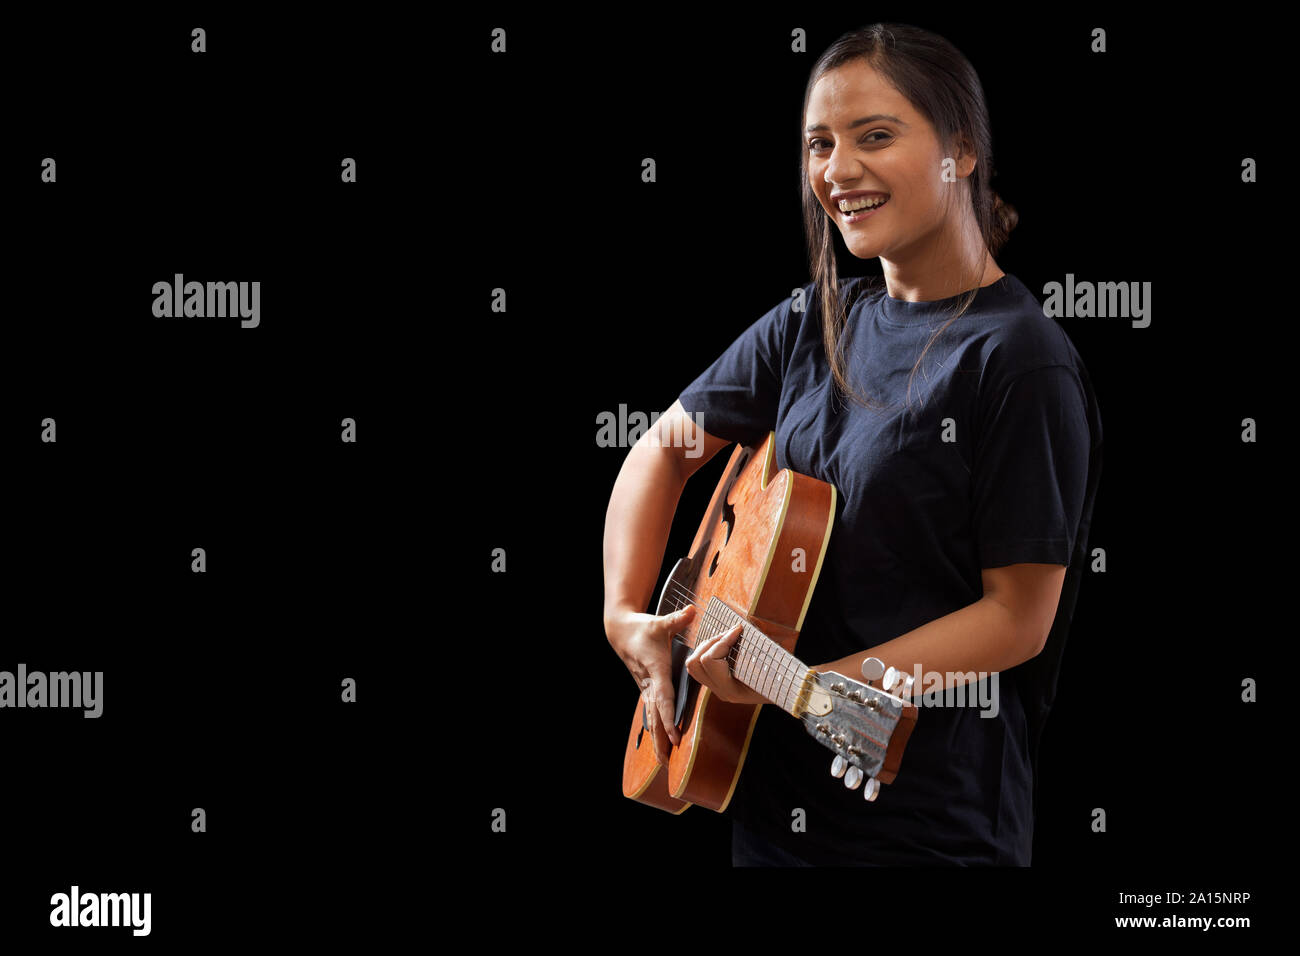 young woman playing guitar over black background Stock Photo